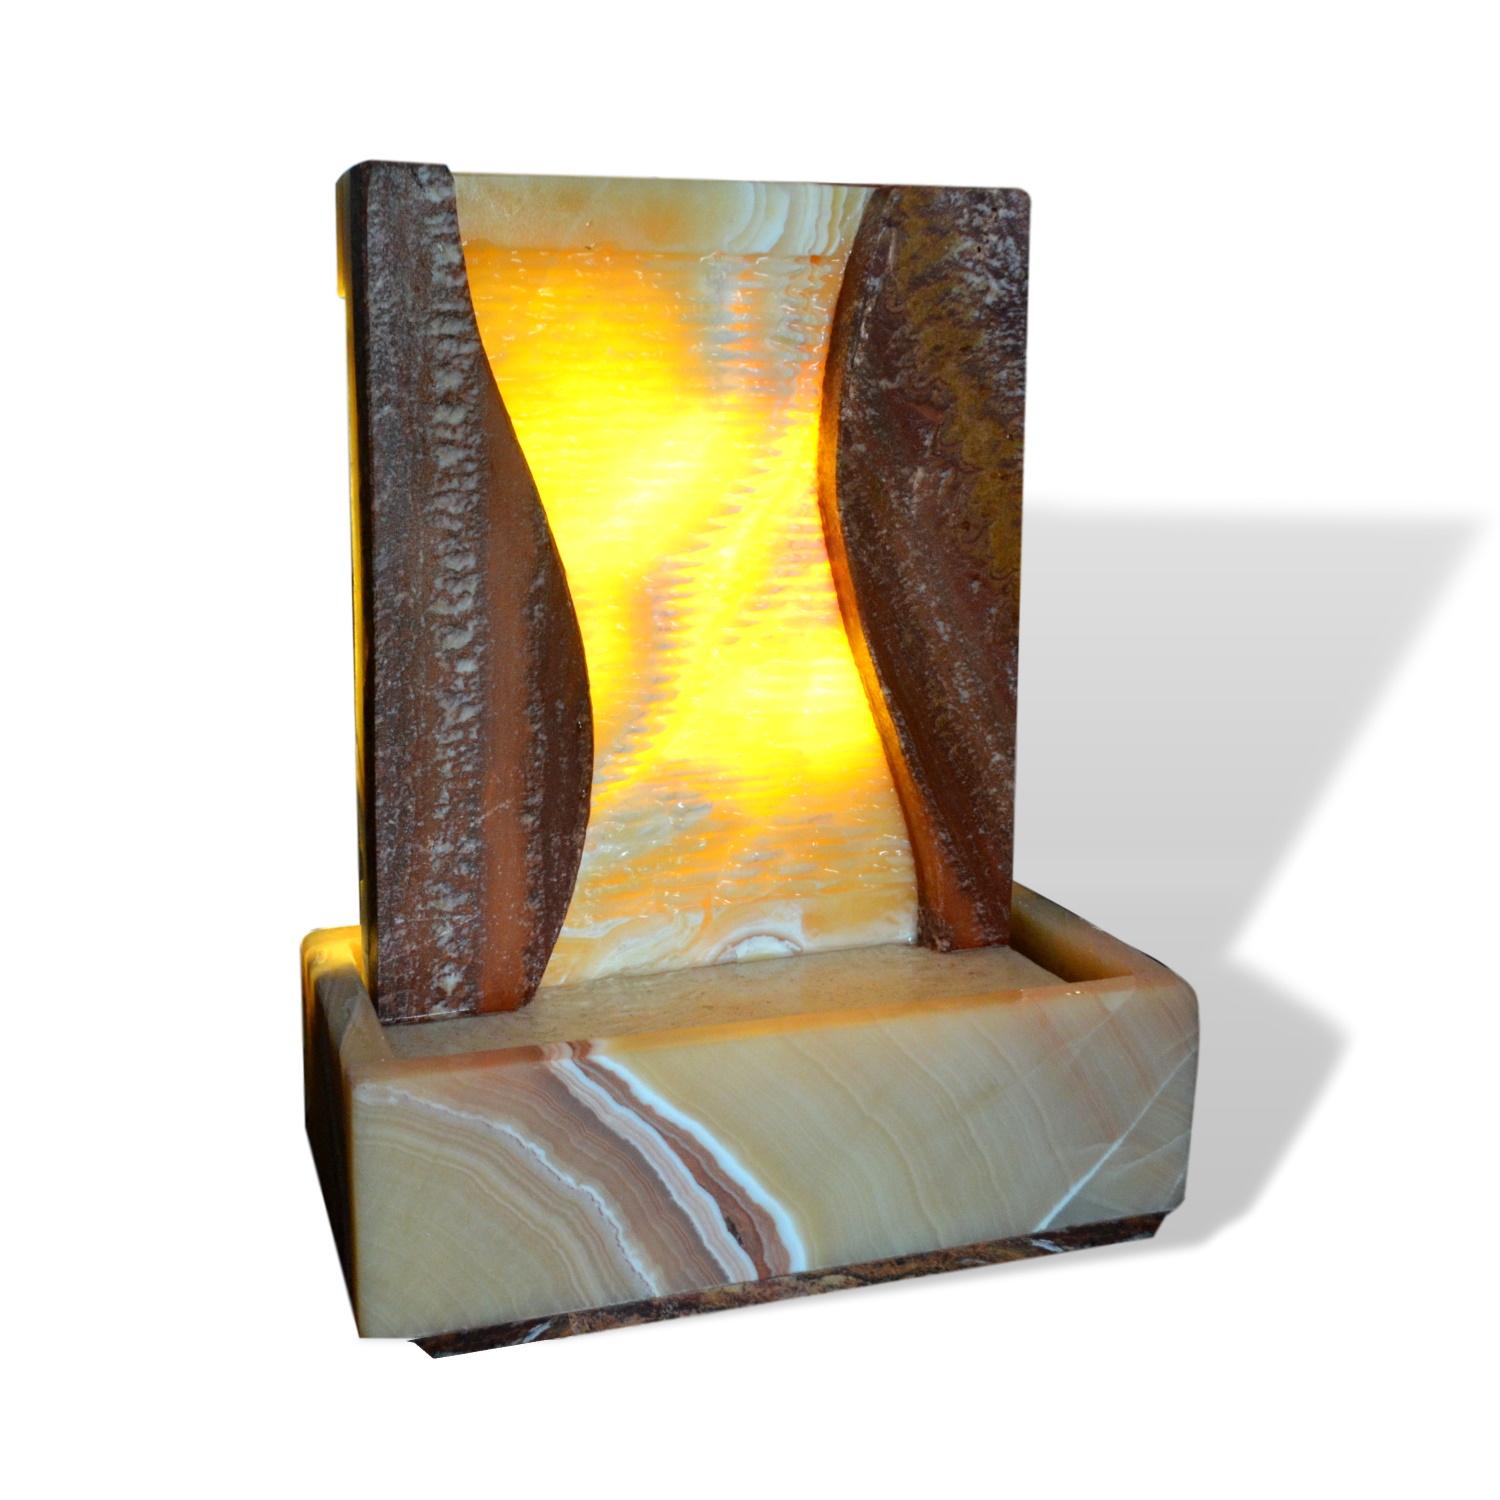 Square base ambient table lamp in onyx.